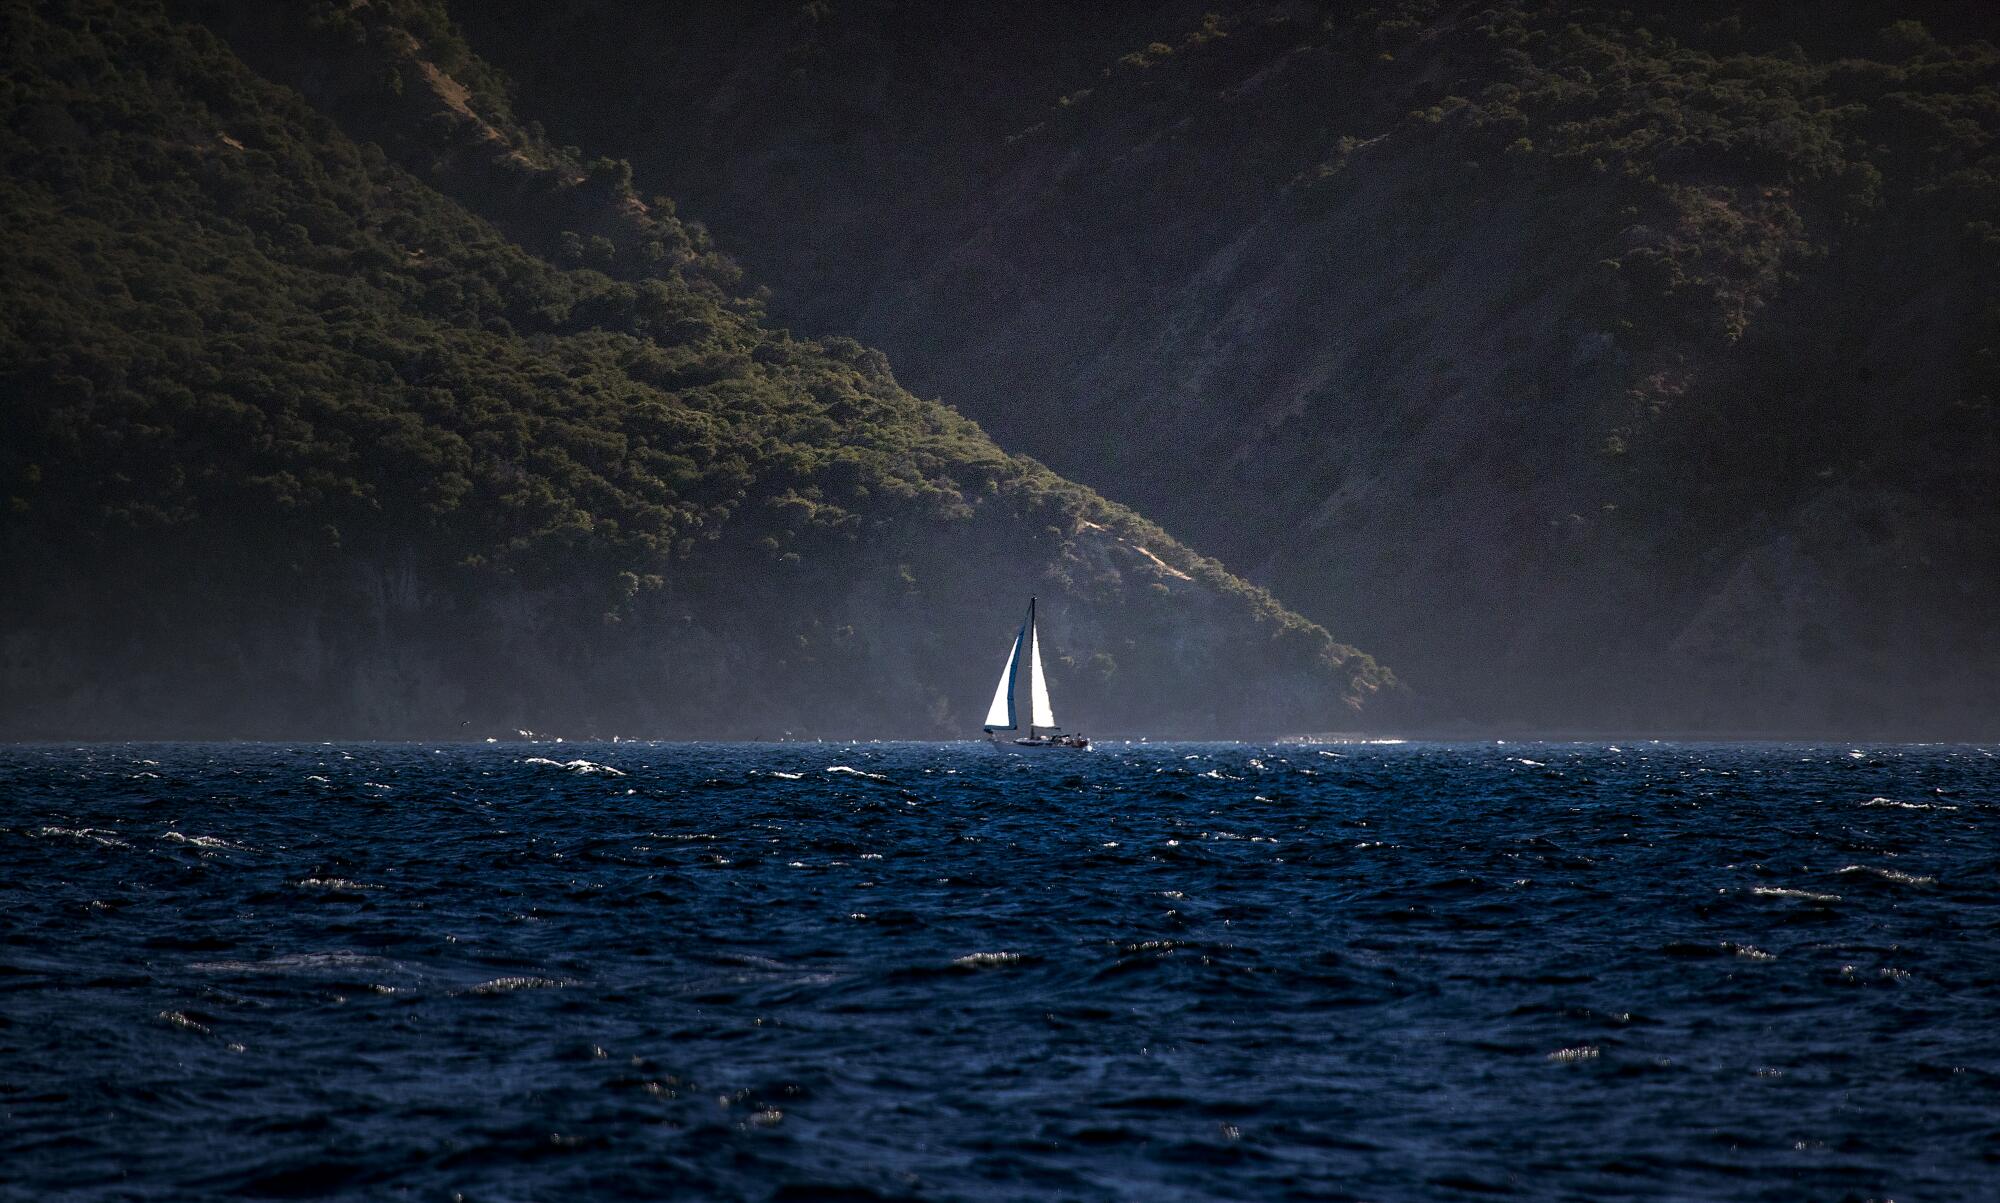 Mountains on an island rise behind a lone sailboat.